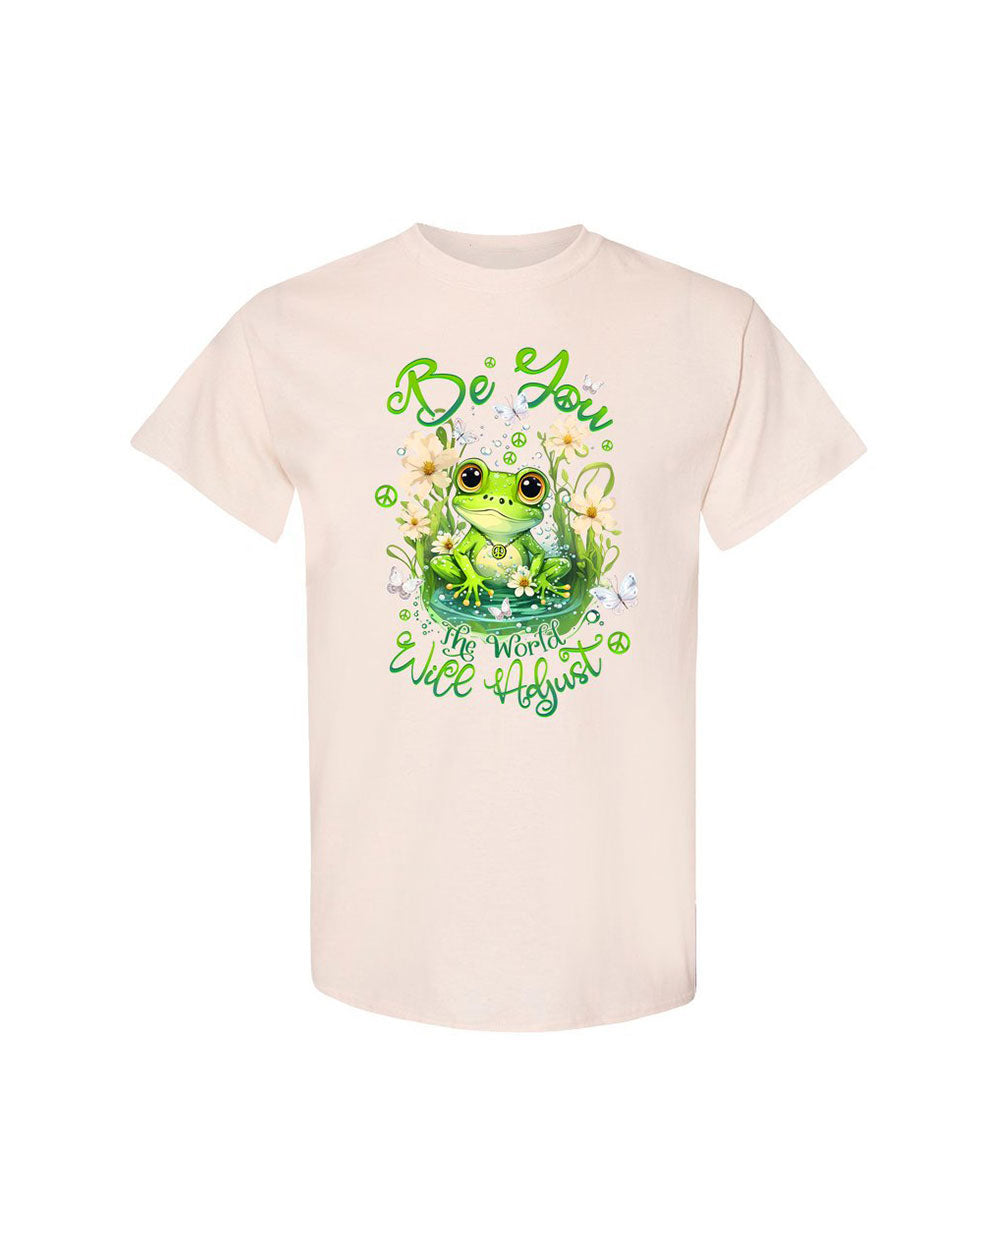 BE YOU THE WORLD WILL ADJUST FROG COTTON SHIRT - TLTW2709239